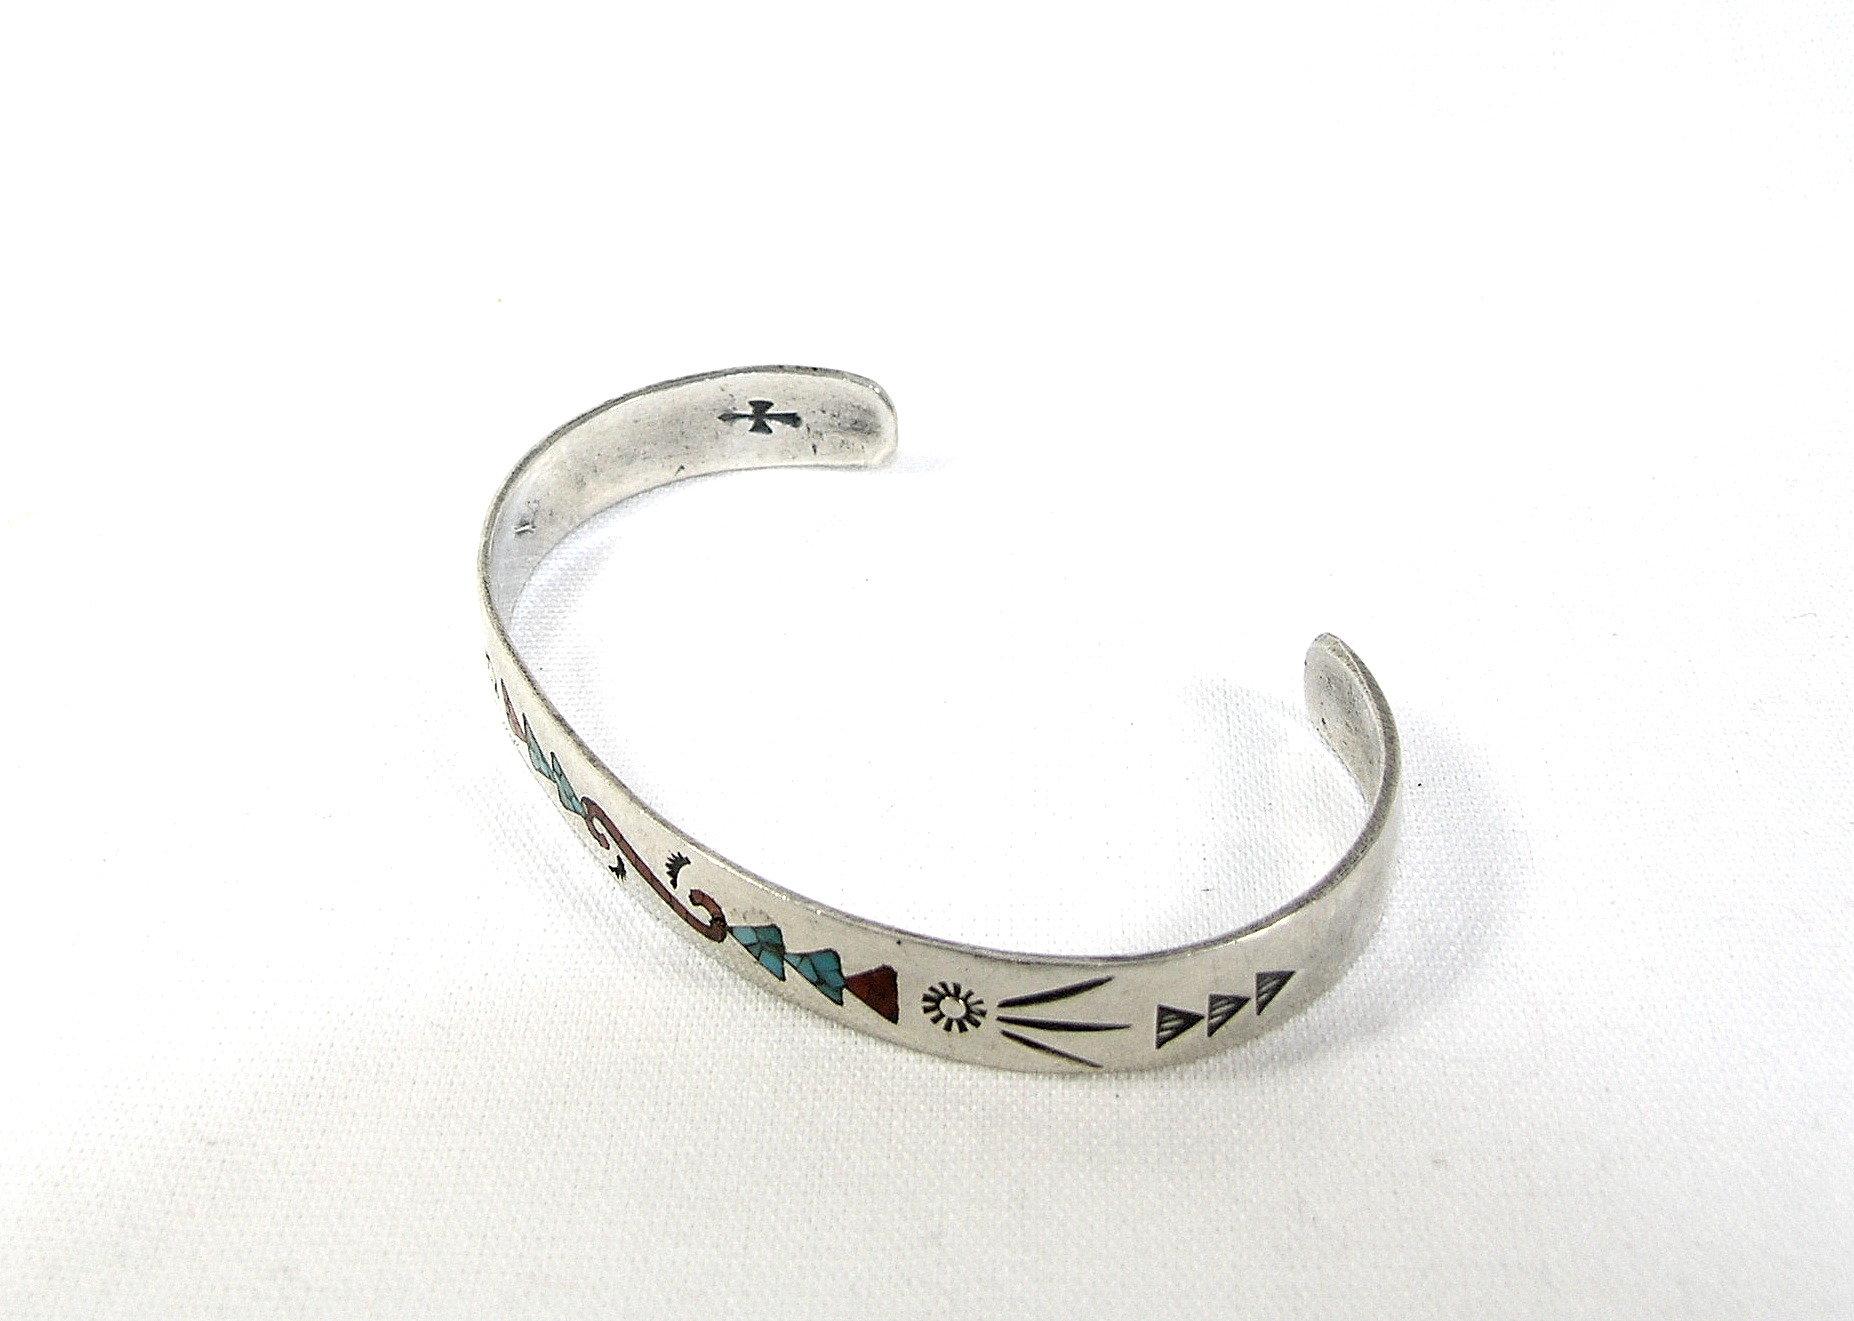 Vintage Native American Sterling Silver Wrist Bracelet With Turquoise Stone